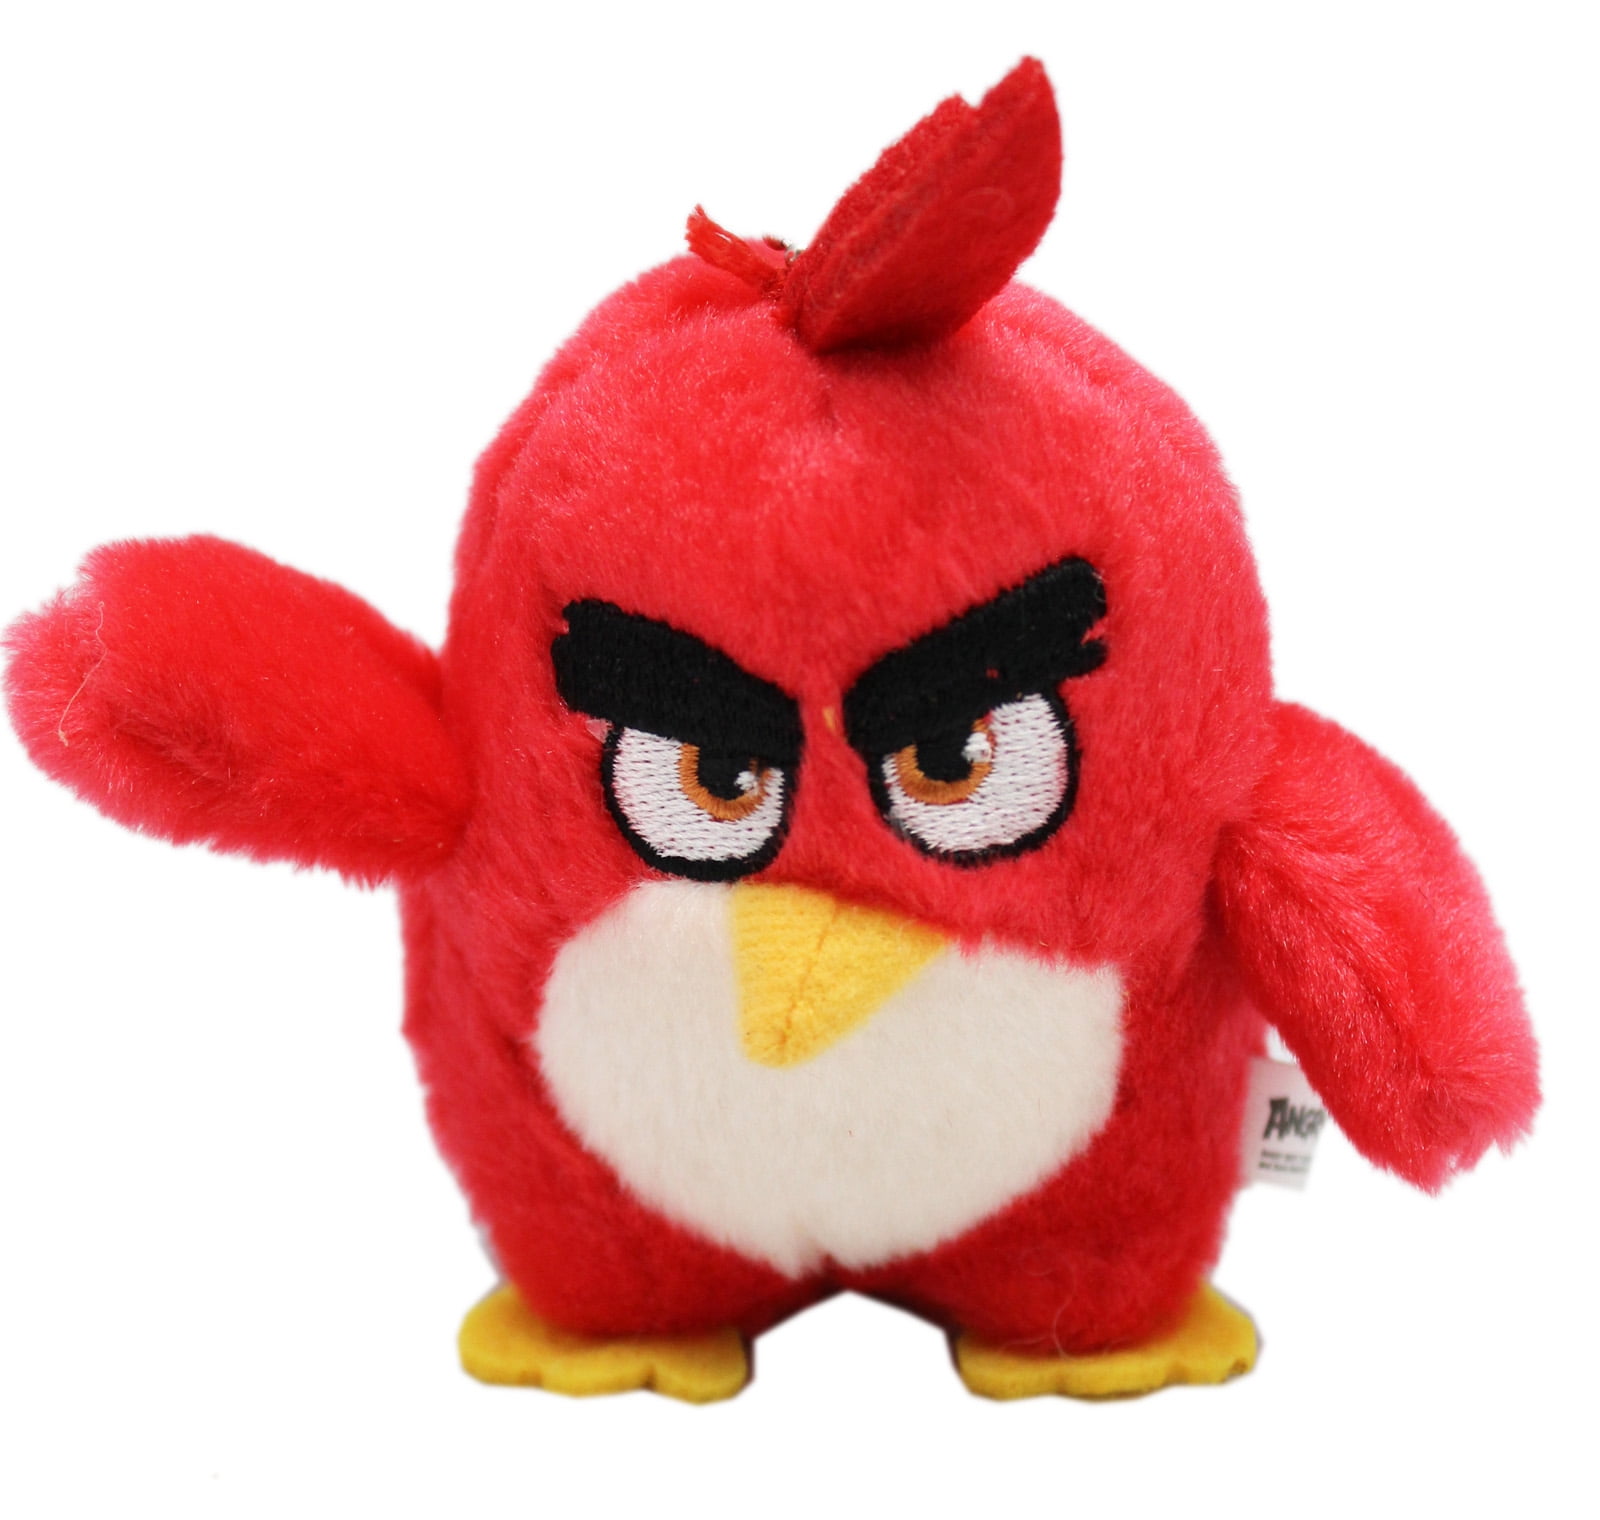 Plush Toy Red Bird NEW Angry Birds Deluxe 8in RED OFFICIALLY LICENSED 